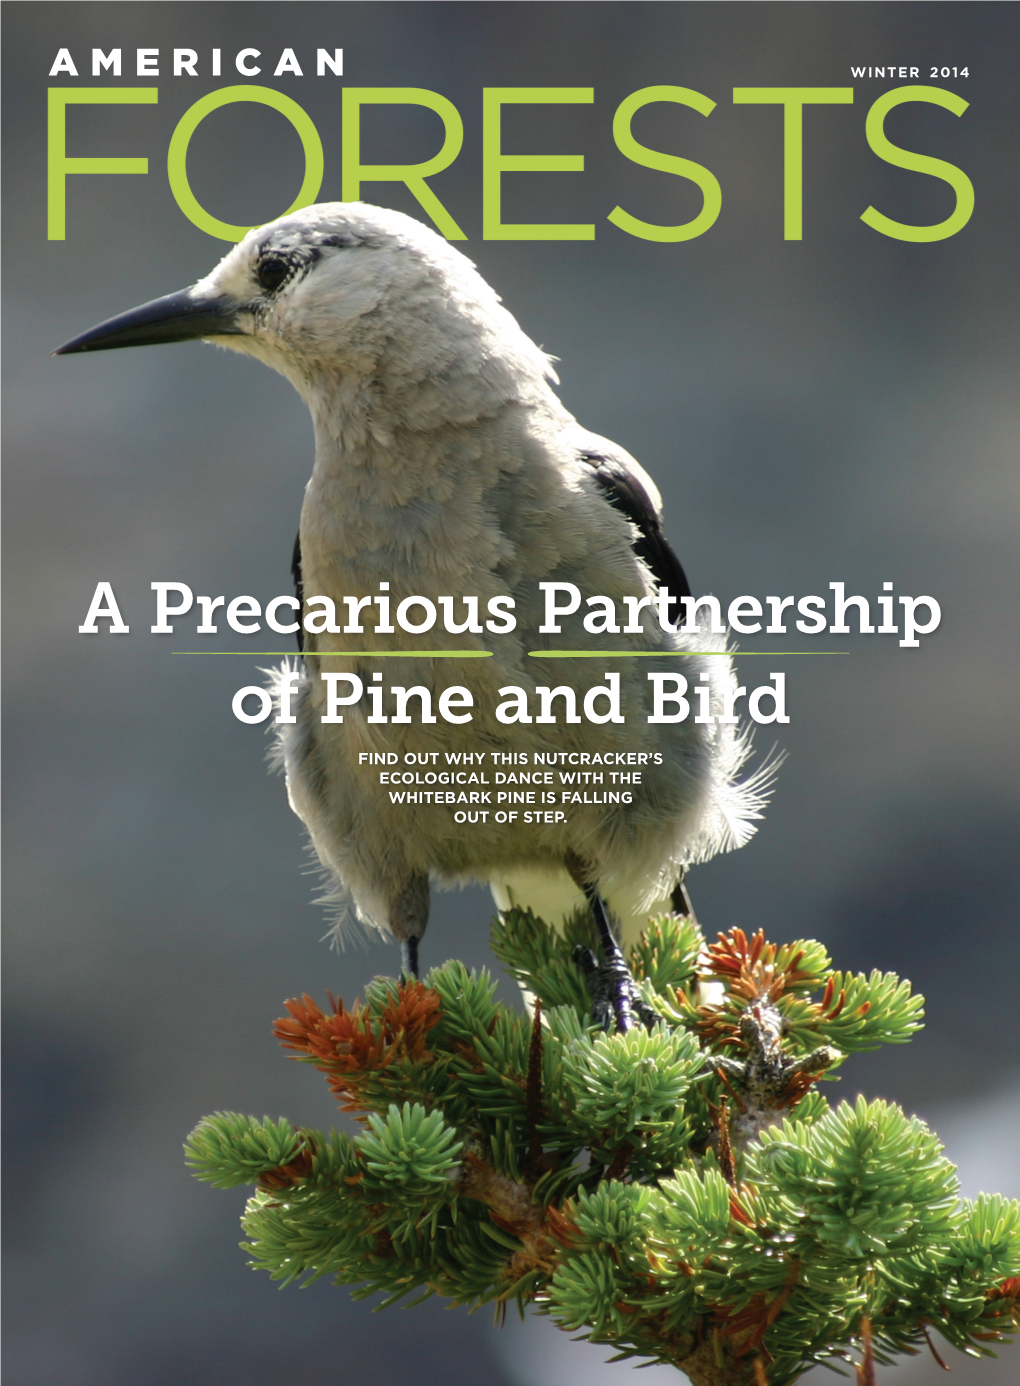 A Precarious Partnership of Pine and Bird FIND out WHY THIS NUTCRACKER’S ECOLOGICAL DANCE with the WHITEBARK PINE IS FALLING out of STEP